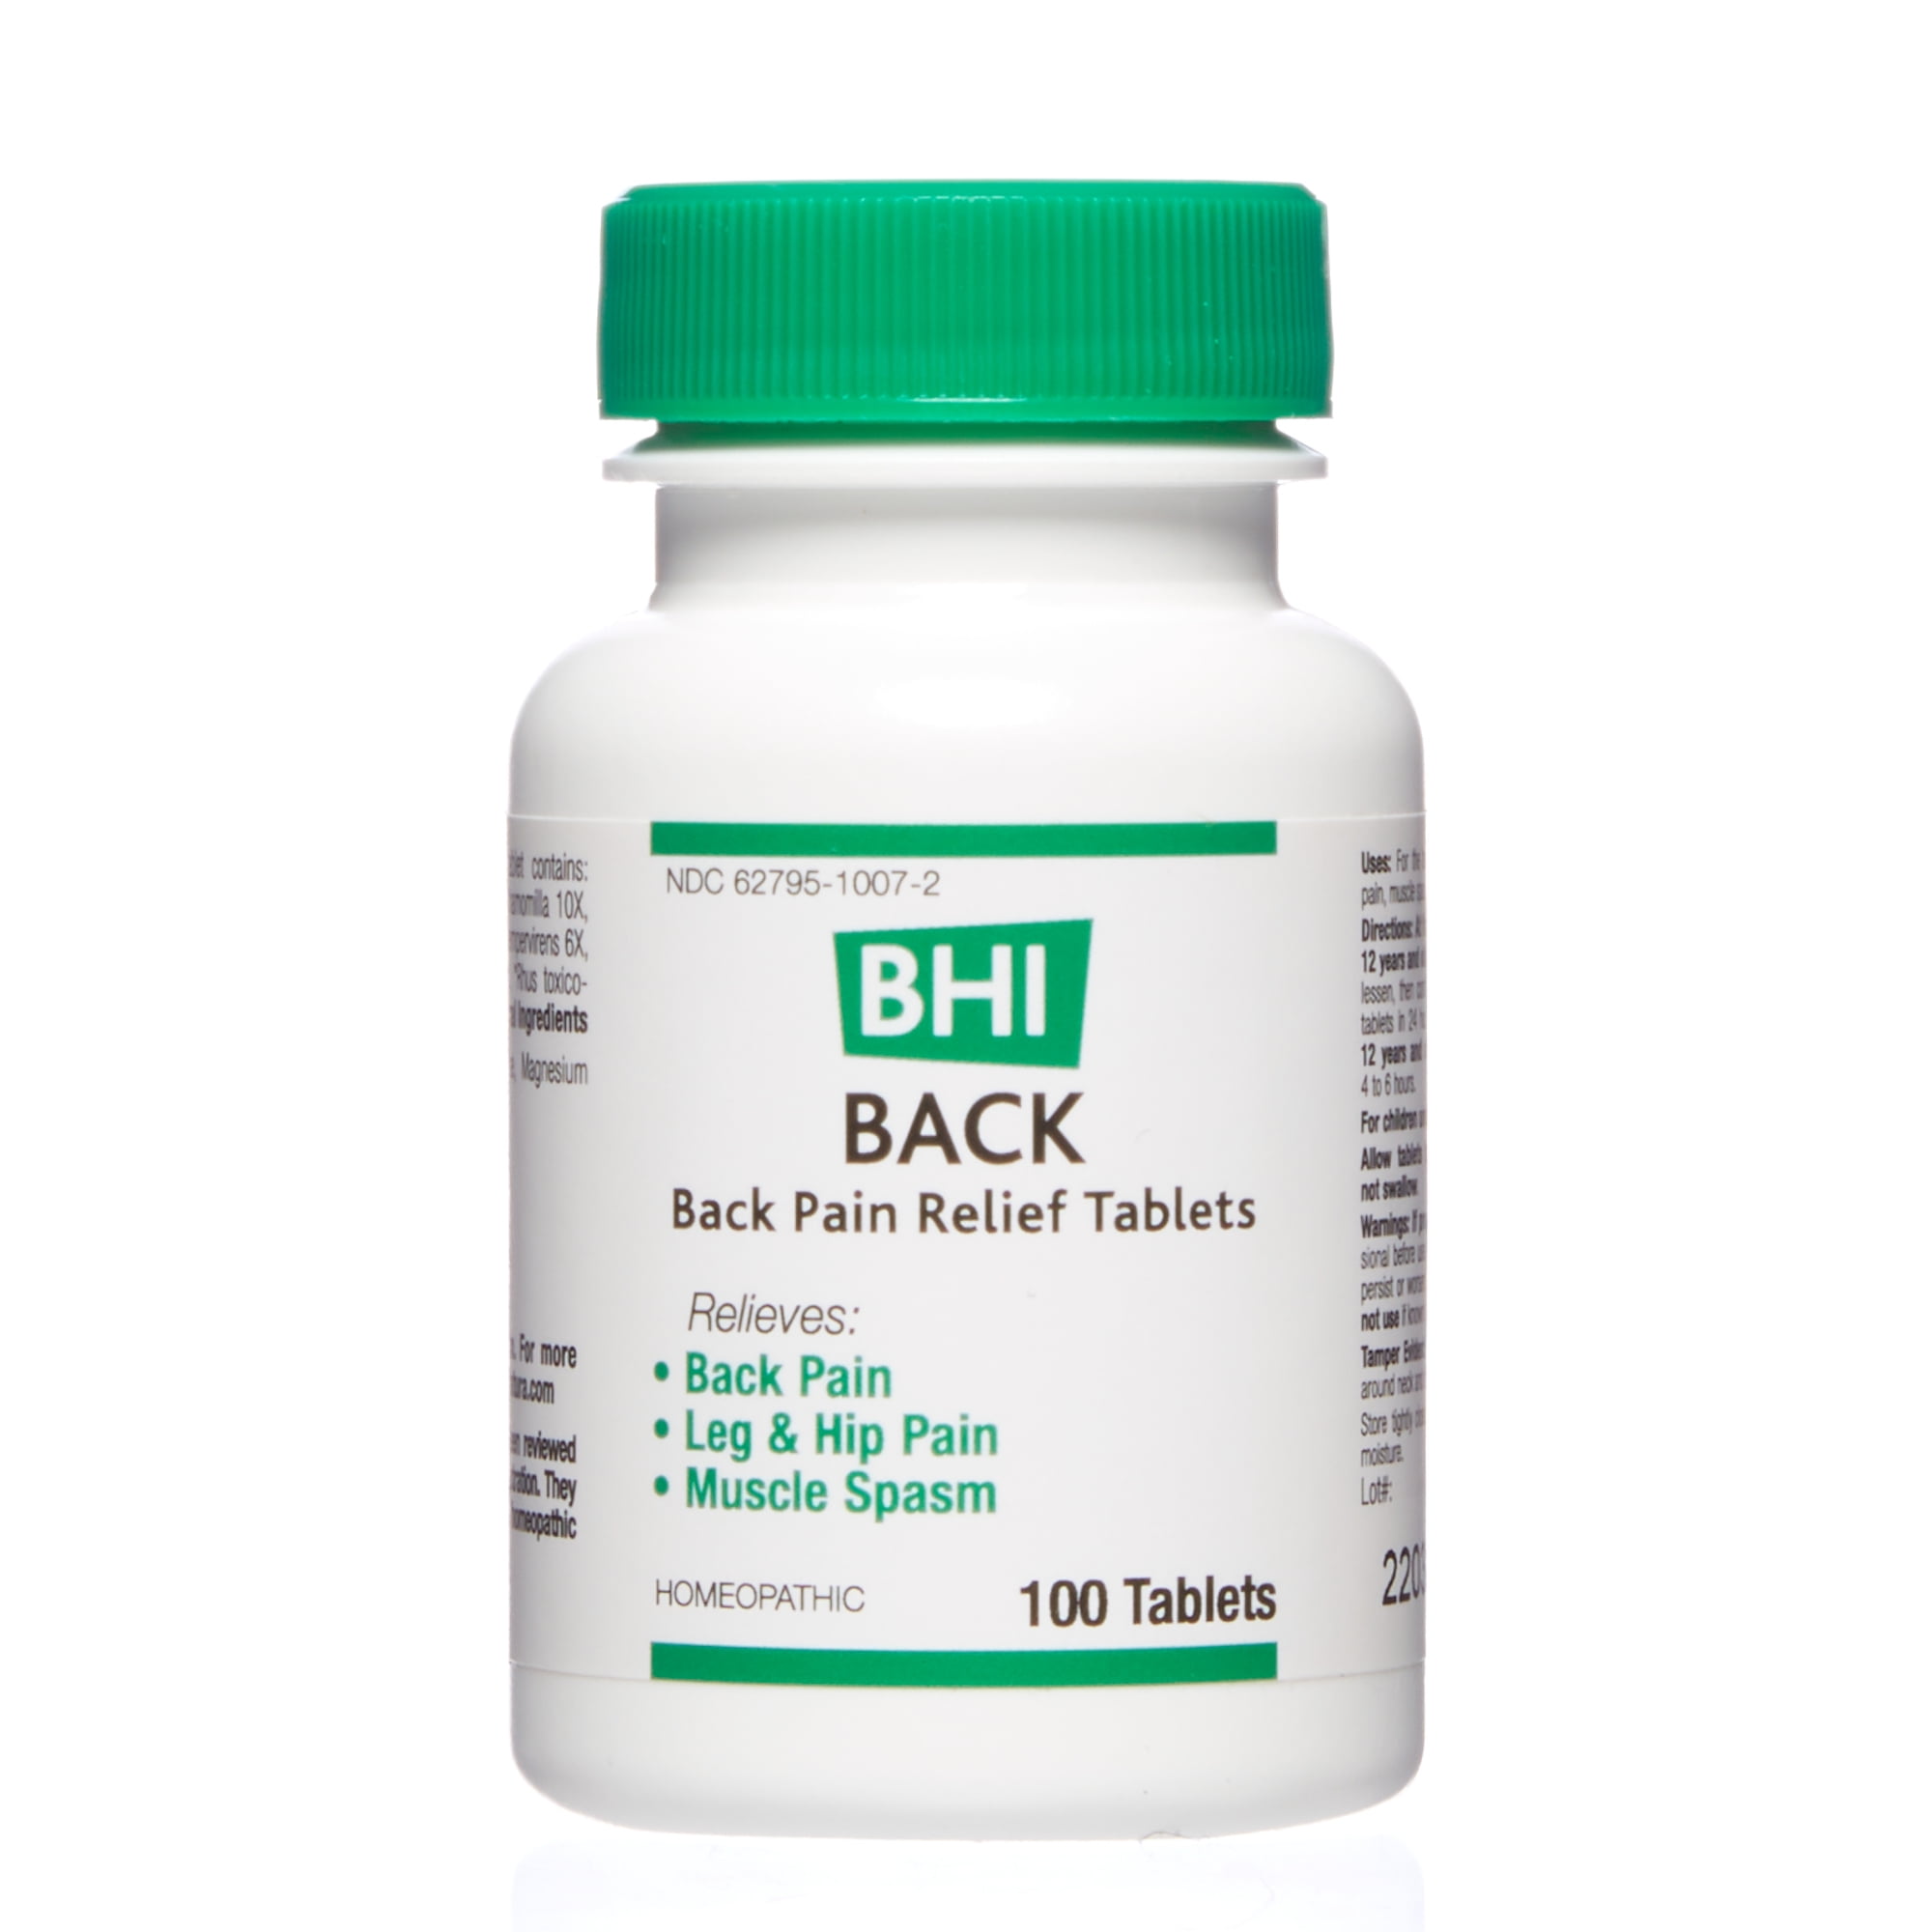 BHI Back Pain Relief Tablets, Natural Homeopathic, 100 Tabs